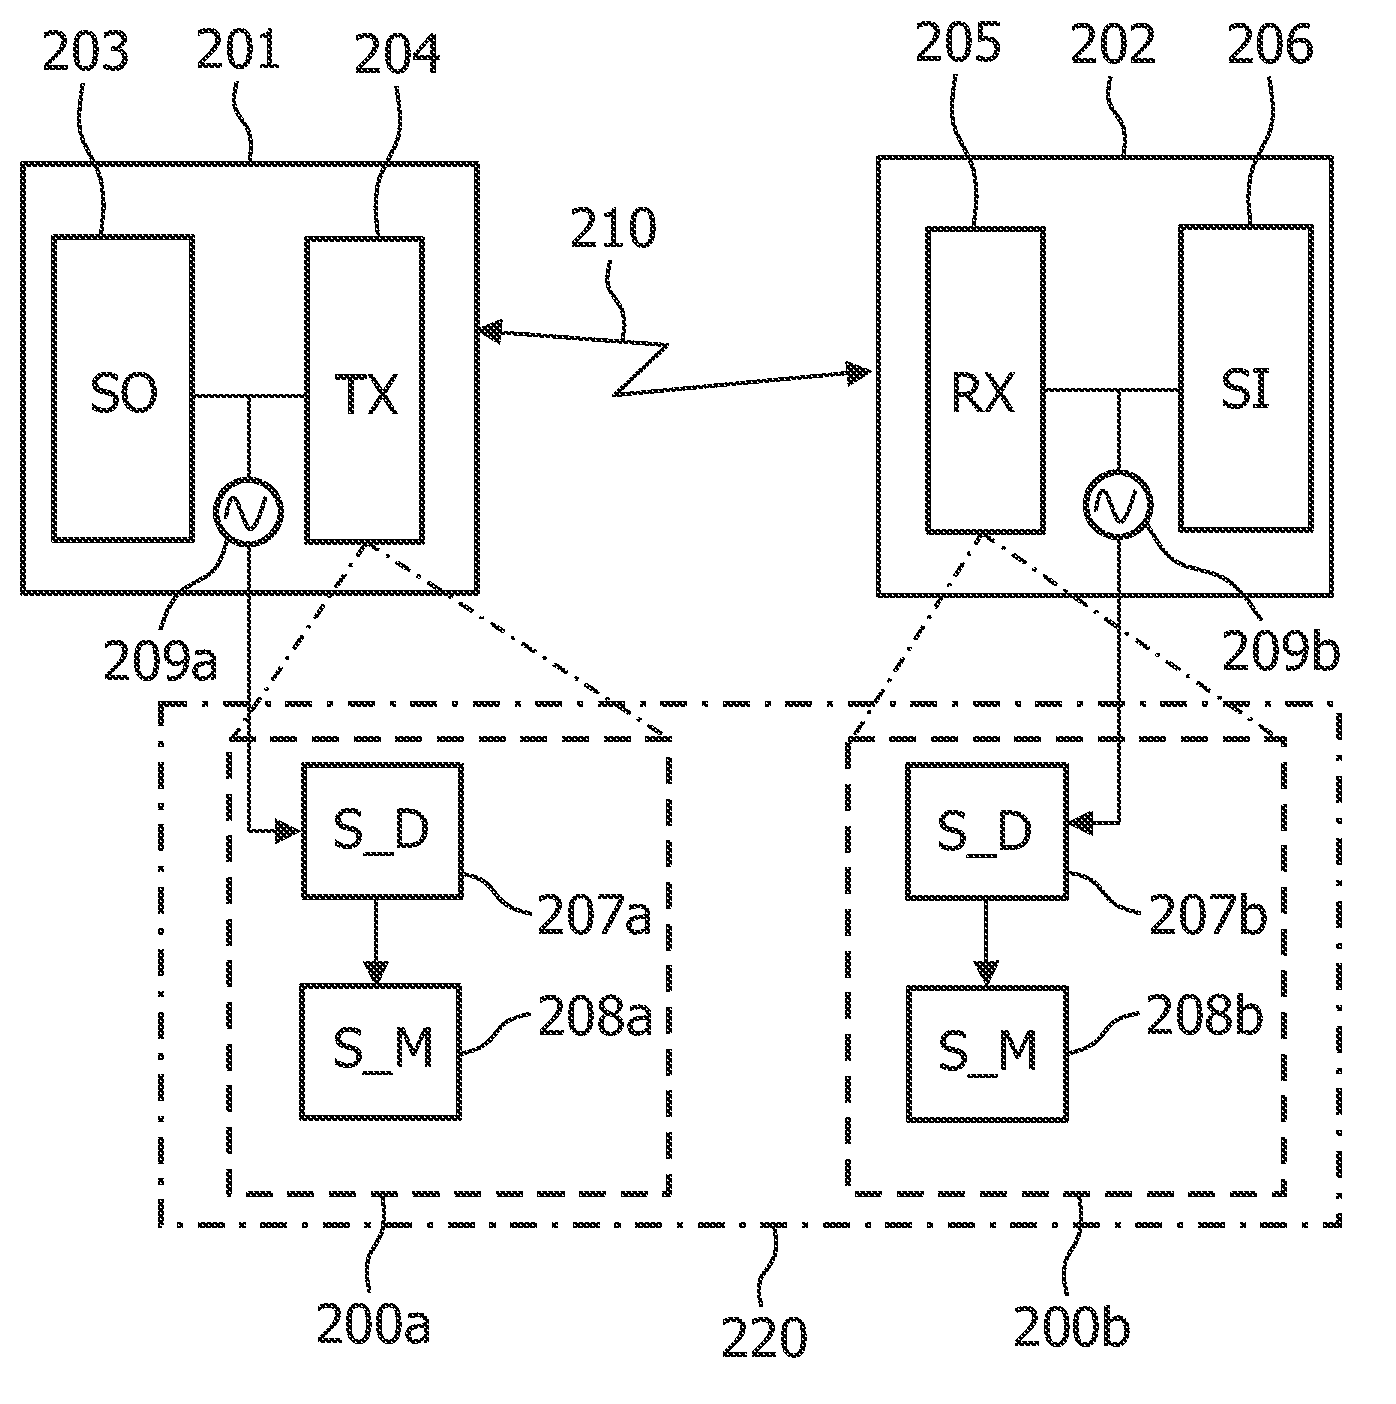 Method of controlling power states in a multimedia system